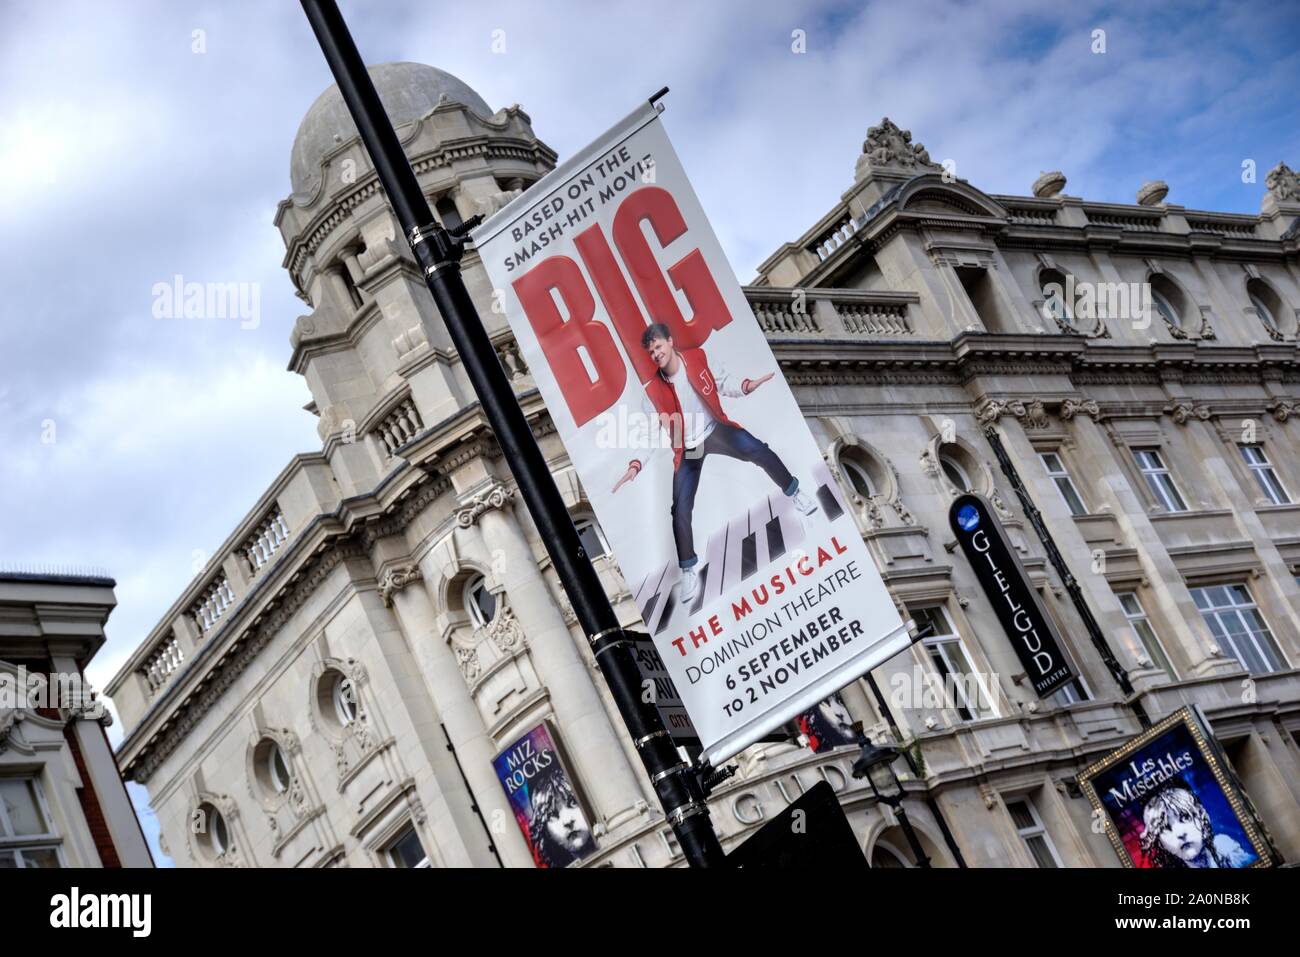 London, United Kingdom - September 7, 2019: Facade of Gielgud theatre in Shaftesbury Avenue showing name signage with sign for musical 'Big' in foregr Stock Photo